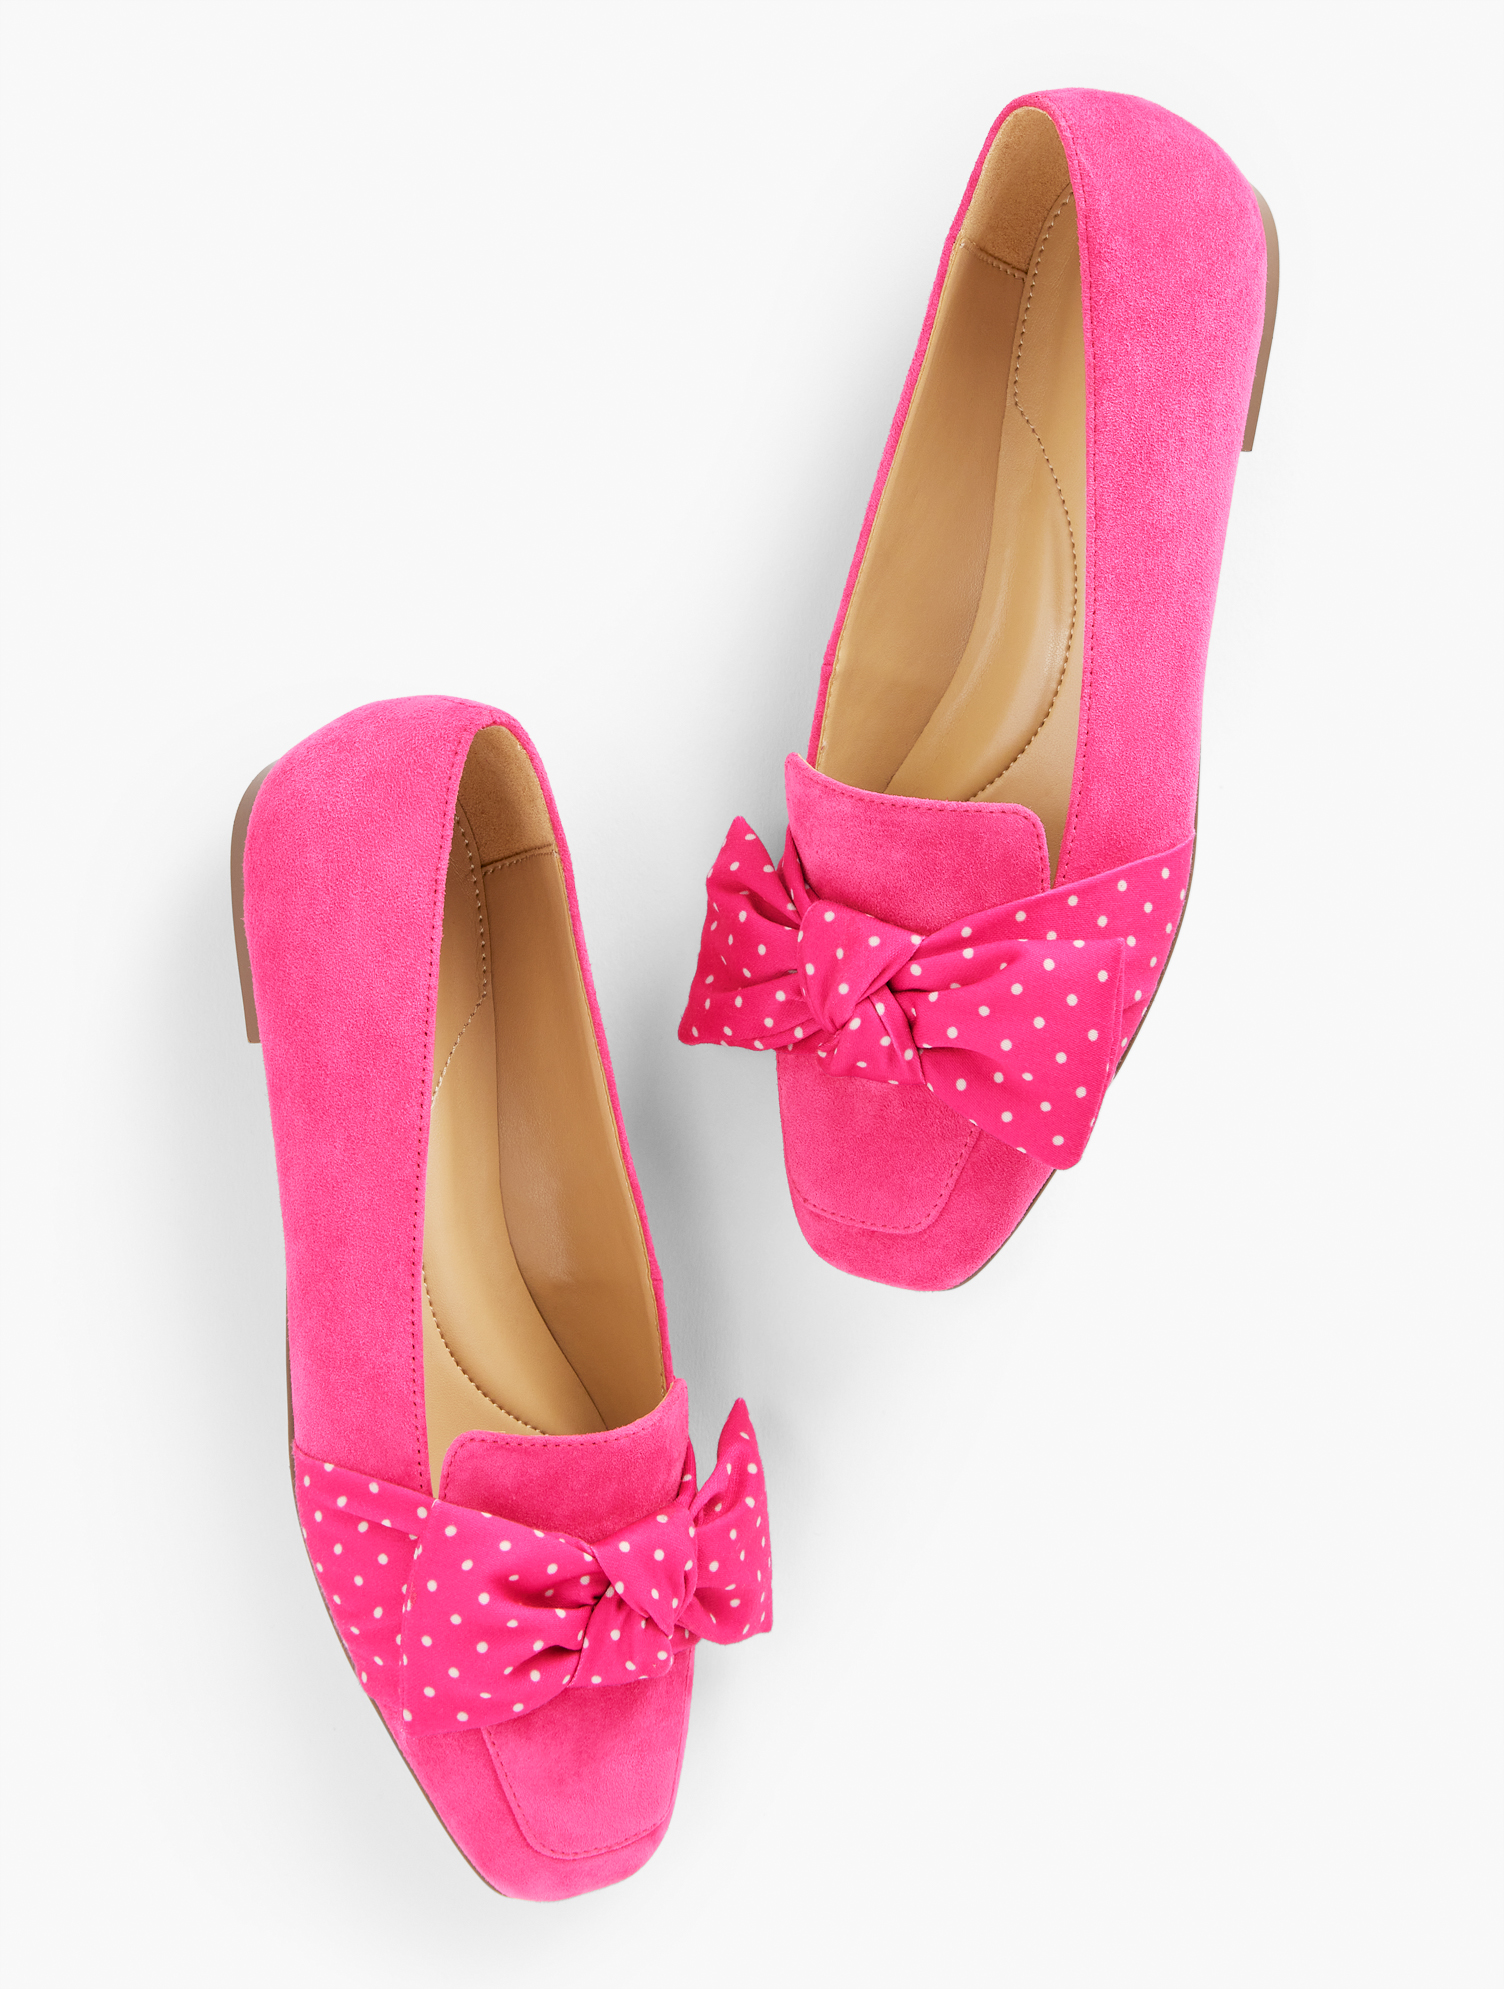 Talbots Stella Bow Loafers - Suede - Vivid Pink - 9m